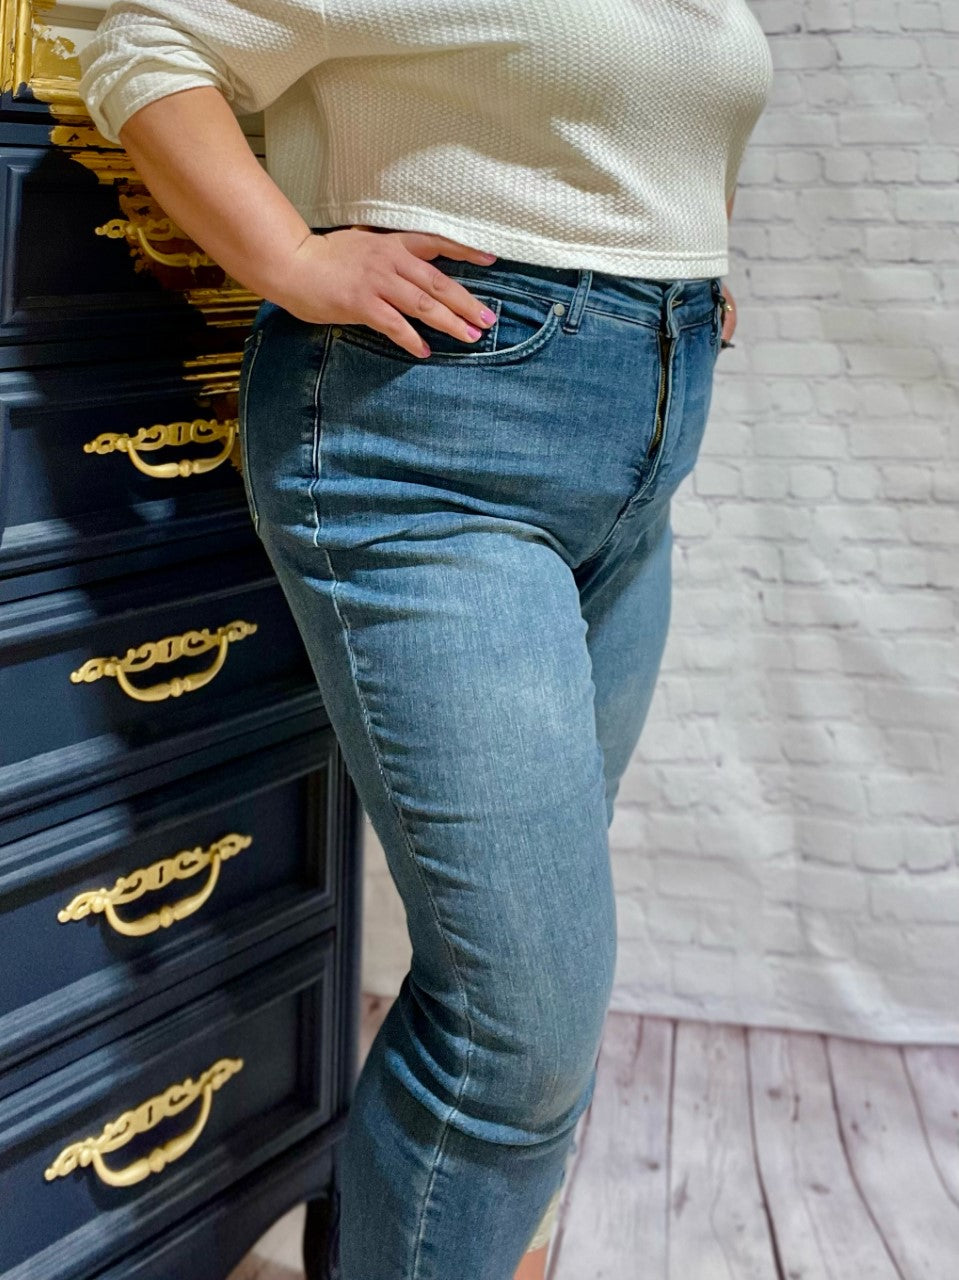 Judy Blue Plus High Waist Tummy Control Jeans  Slip into these Judy Blue Plus High Waist Tummy Control Jeans and show off those curves! These ultra flattering jeans feature a high waist tummy control top, 27" rise, a distressed hem and are finished with a classic medium indigo rinse. Also available in Regular Sizes.  Style: 88425 PL